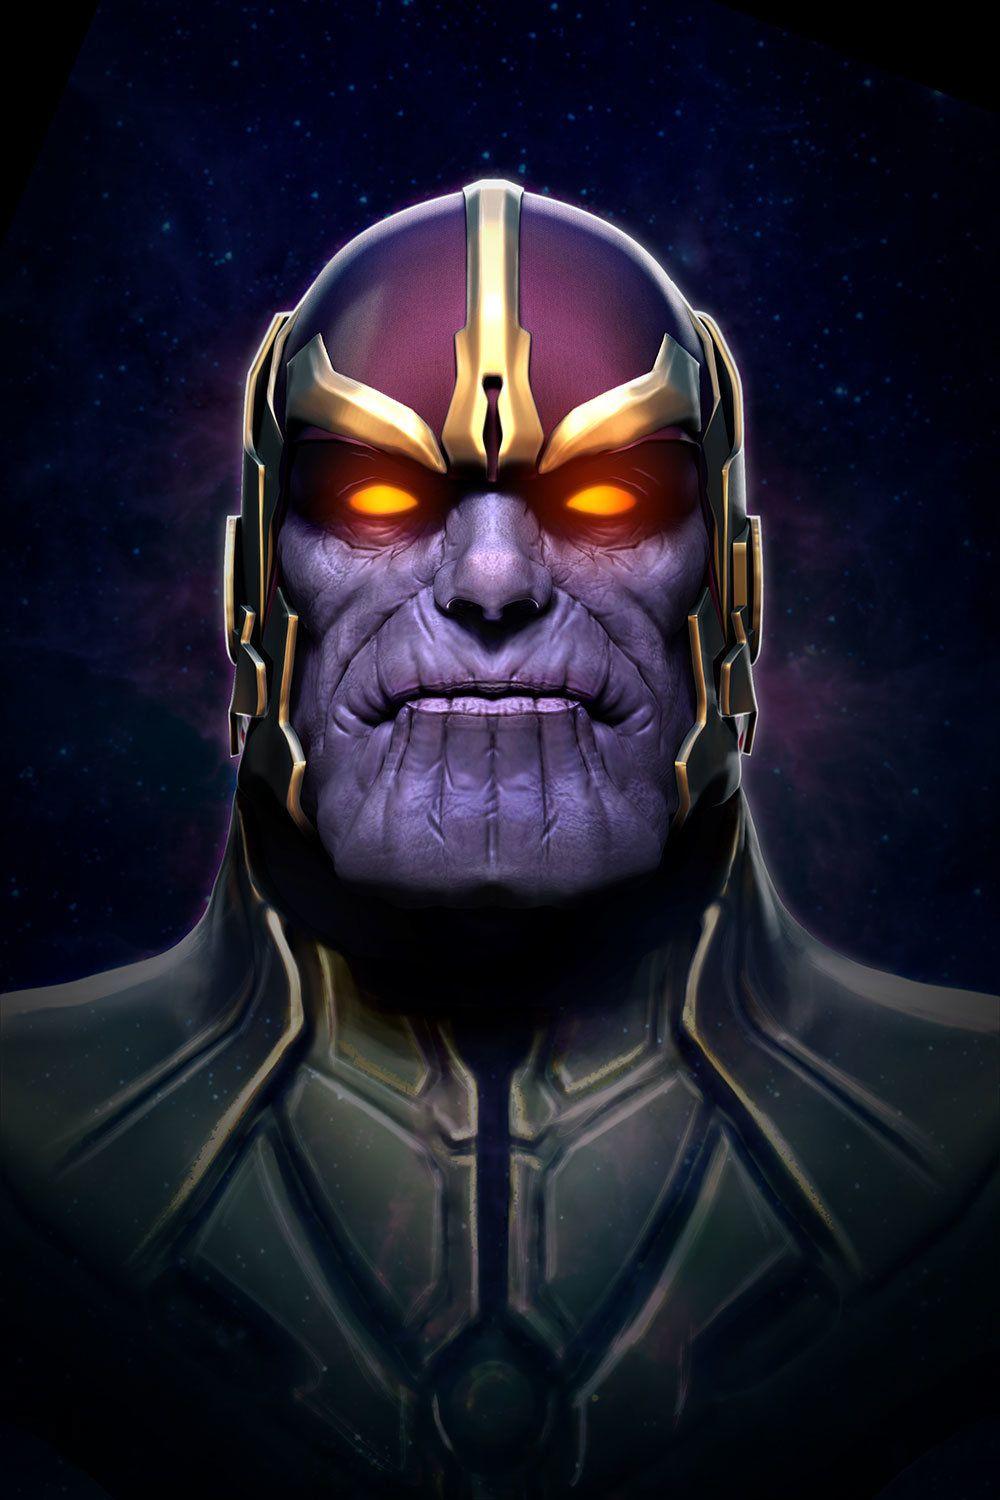 Thanos Wallpaper Android HD. Best Funny Image